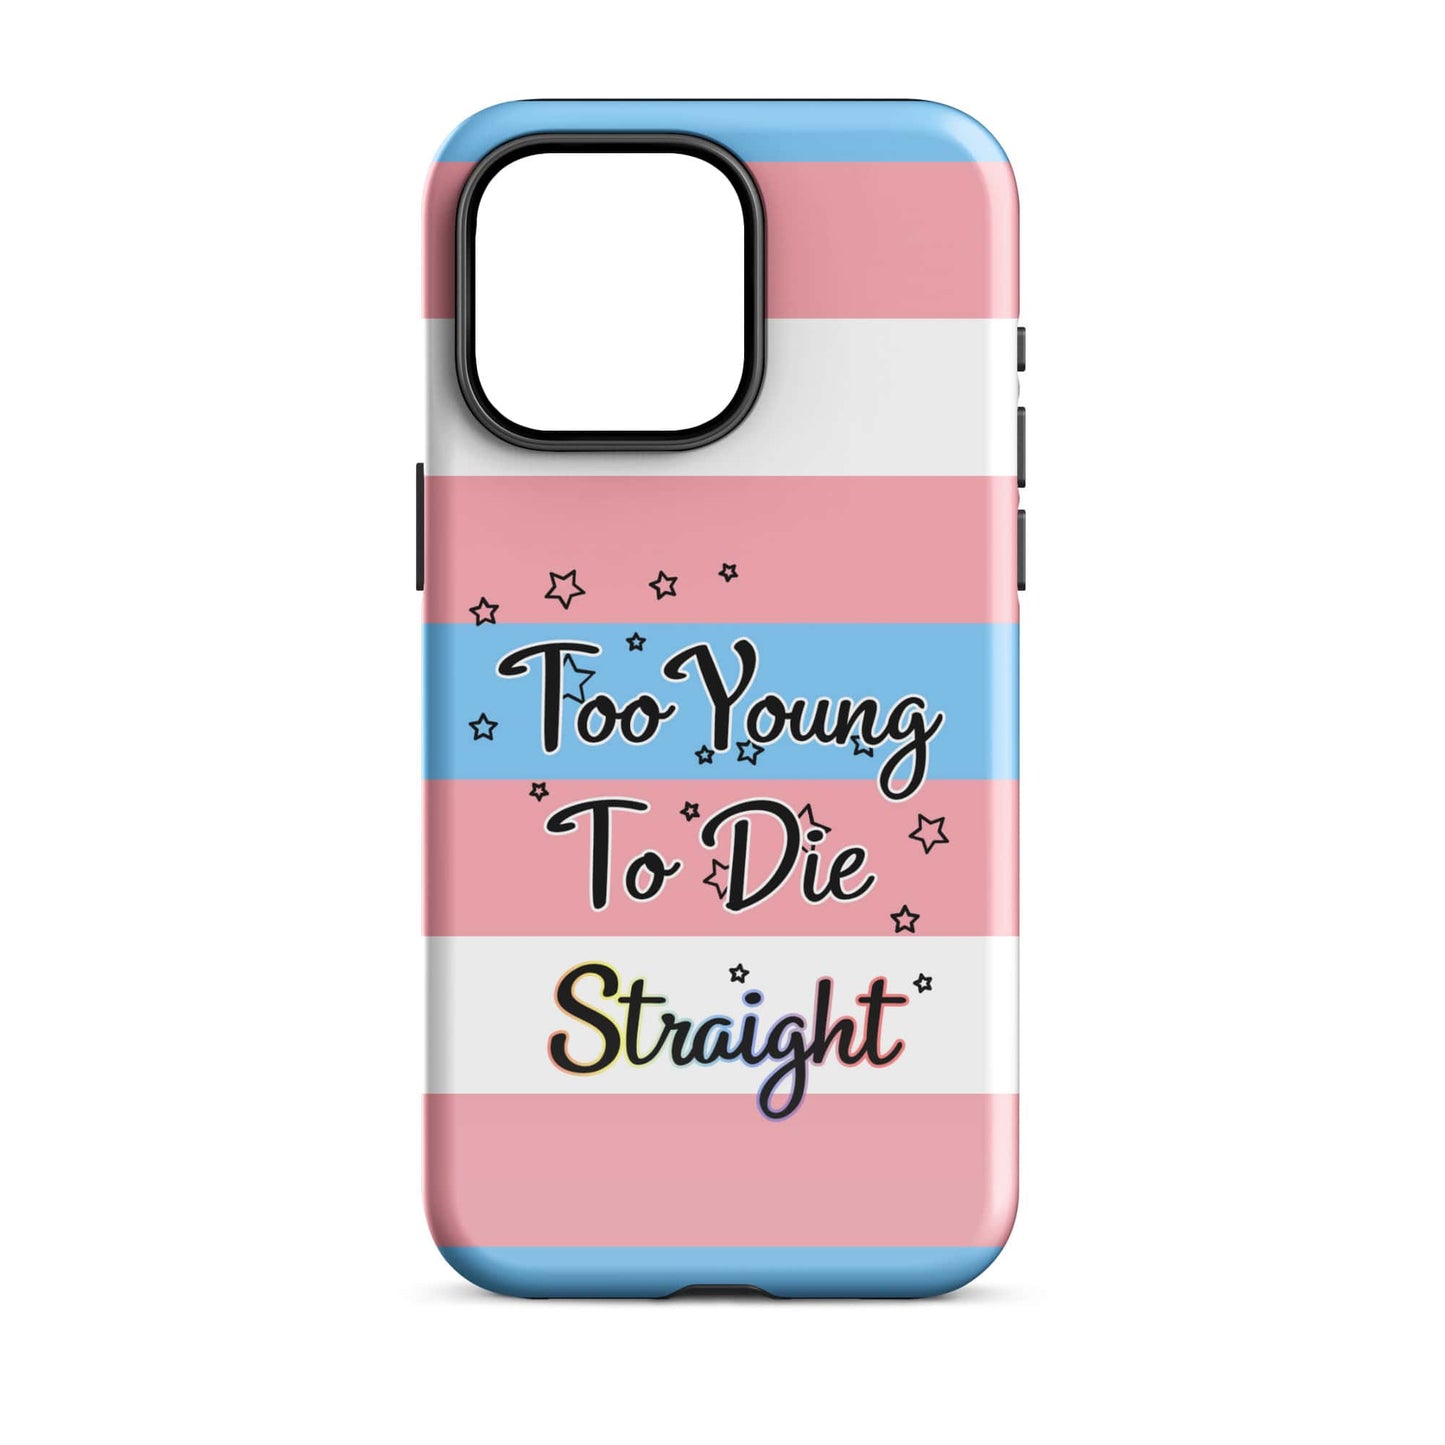 Too Young To Die Straight - (Transgender Flag) Quoted iPhone Case